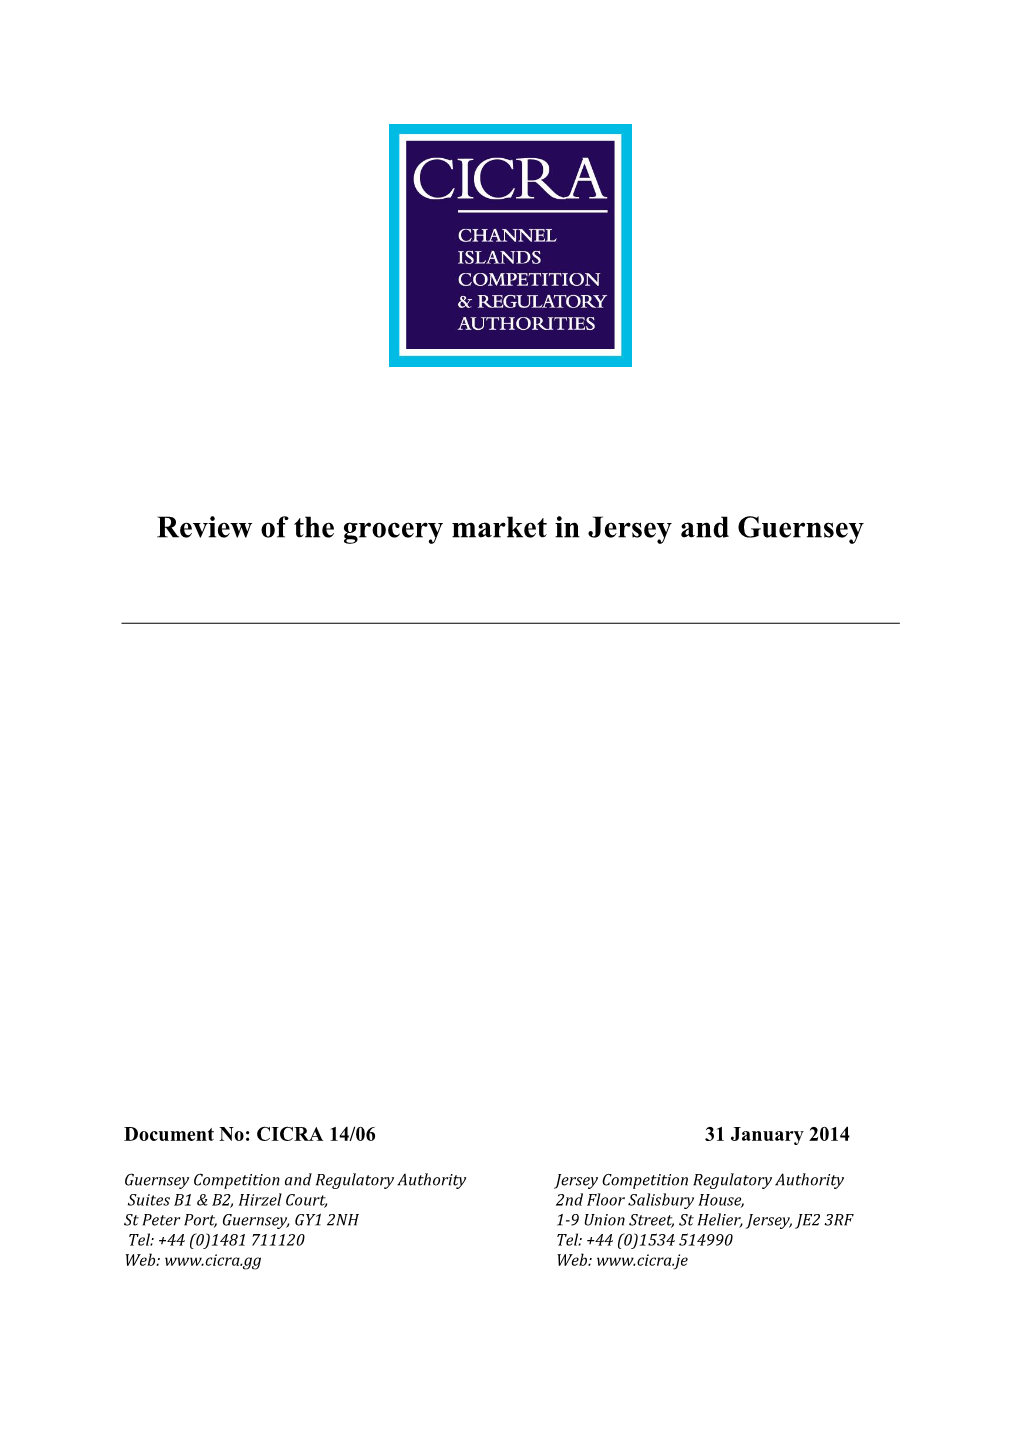 Review of the Grocery Market in Jersey and Guernsey